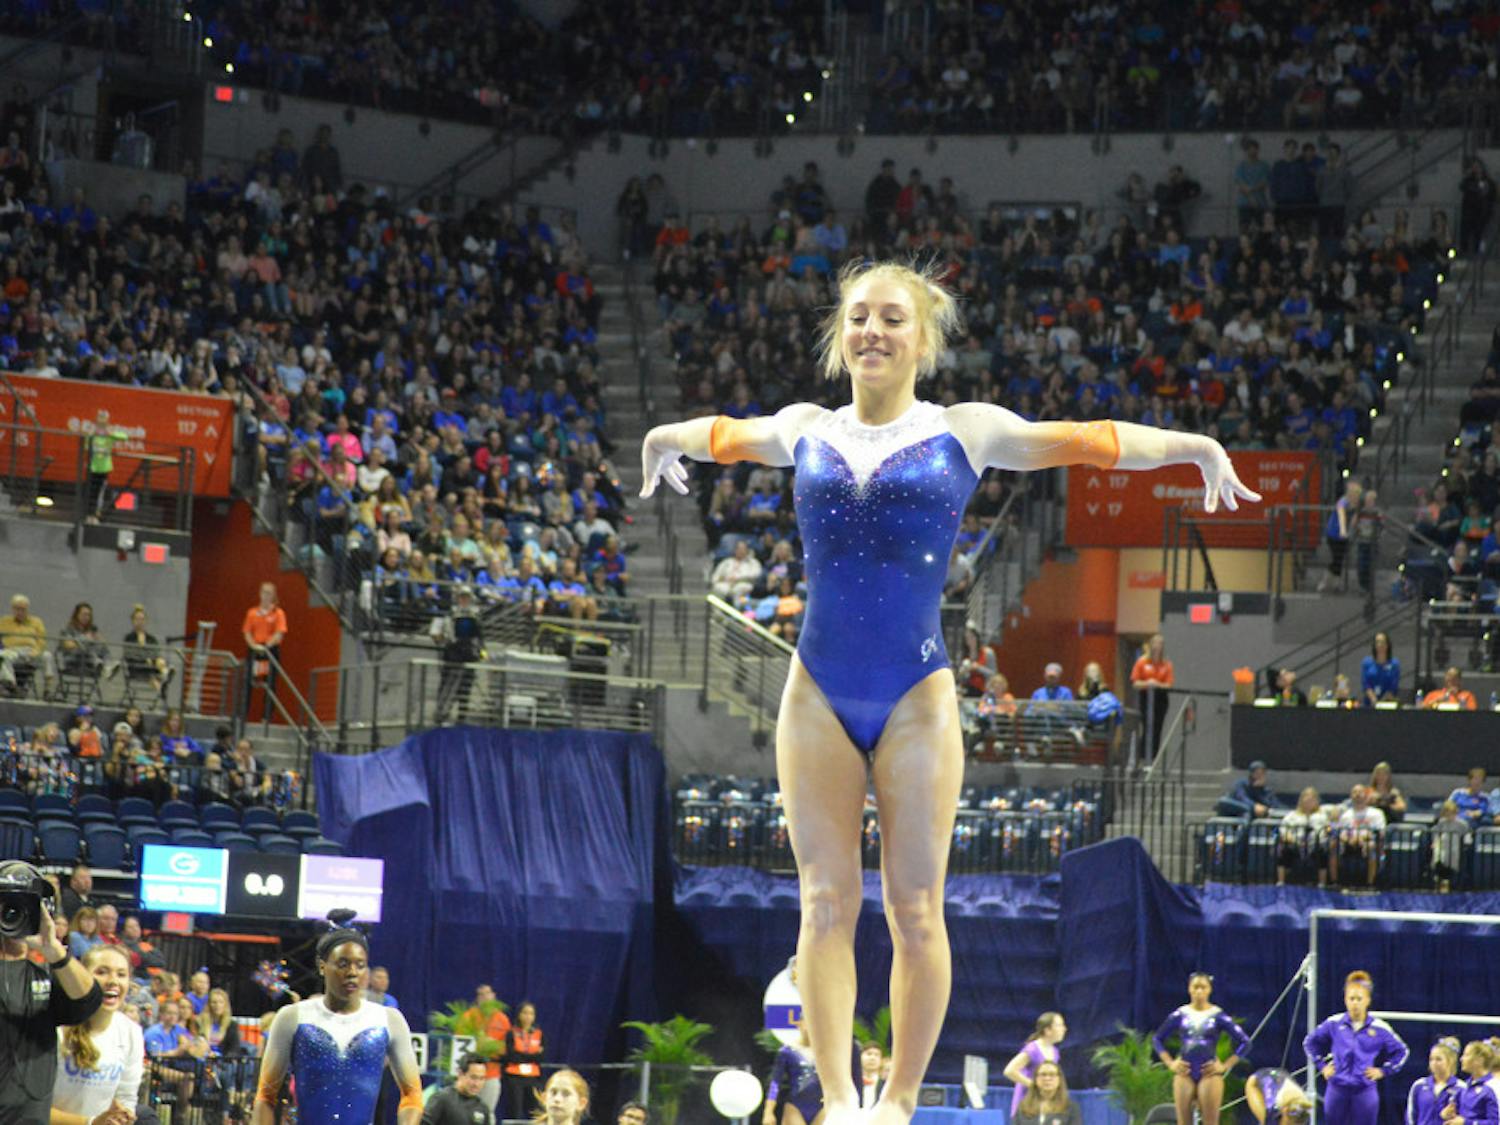 Senior Alex McMurtry and the No. 5 Gators gymnastics team will play host to No. 9 Alabama tonight at the O'Connell Center. “I think it’s just easier on home turf and we have that momentum," she said. 